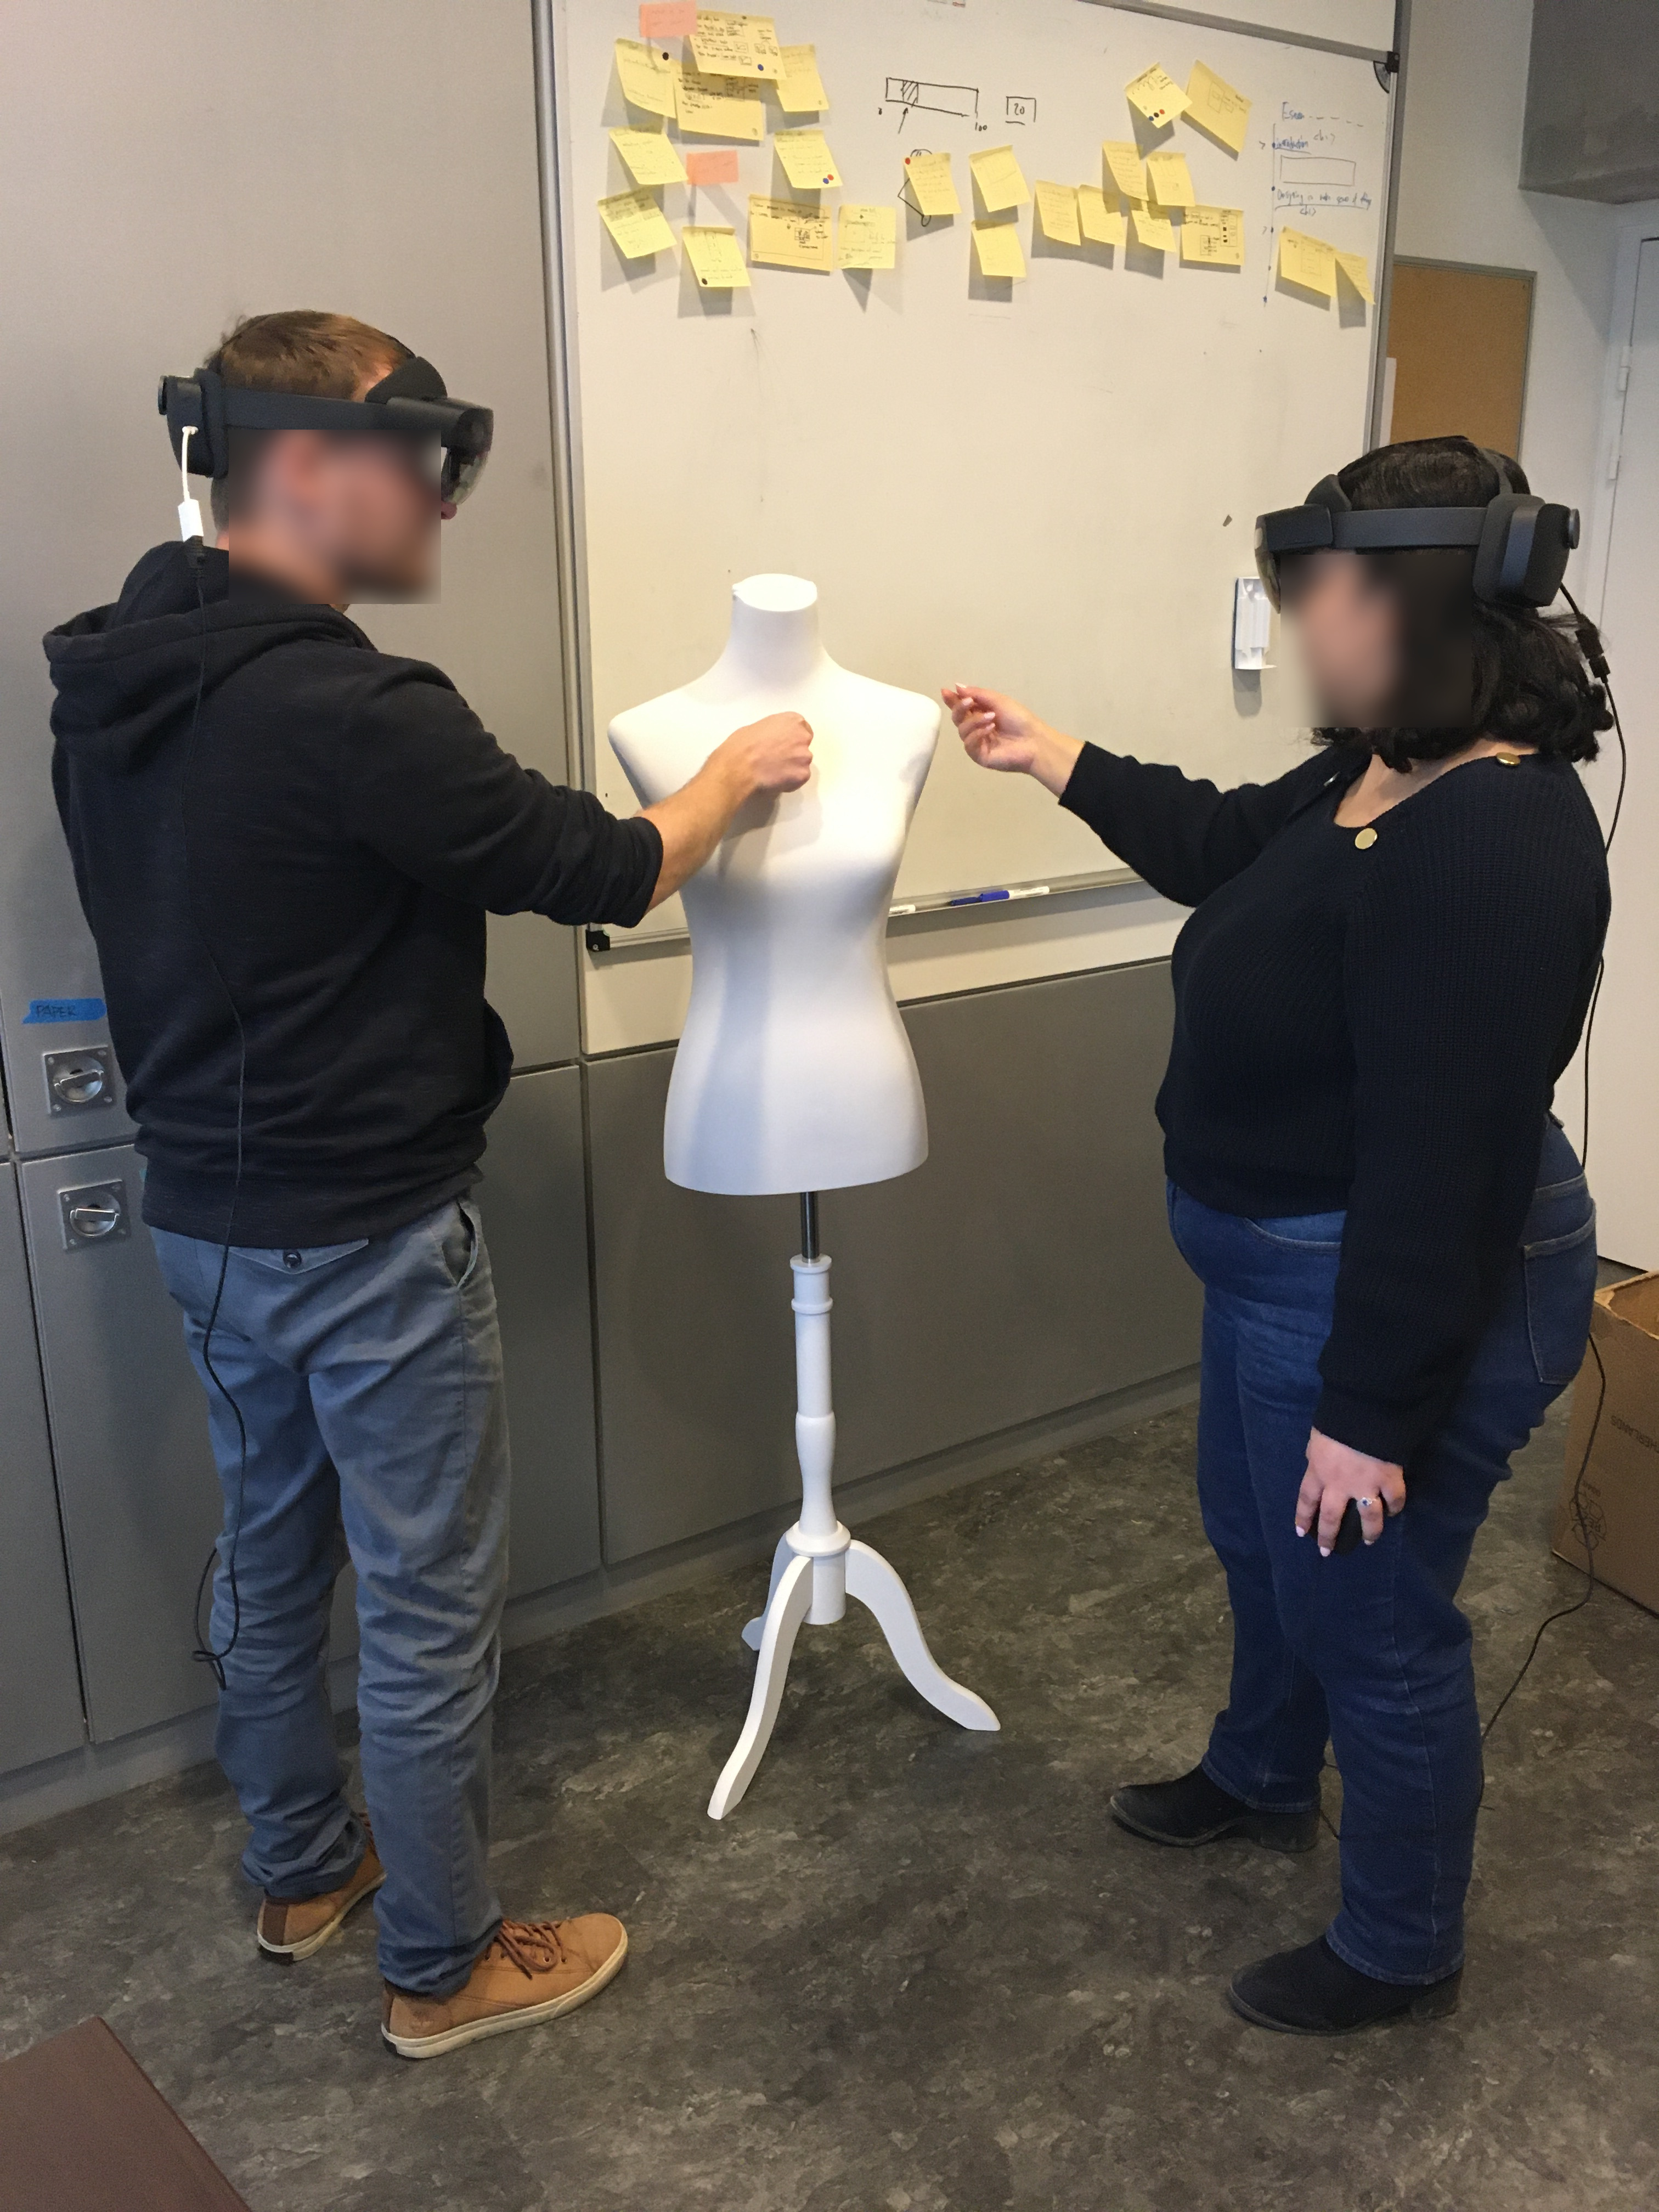 Two collaborators with AR headset working around a sewing mannequin.